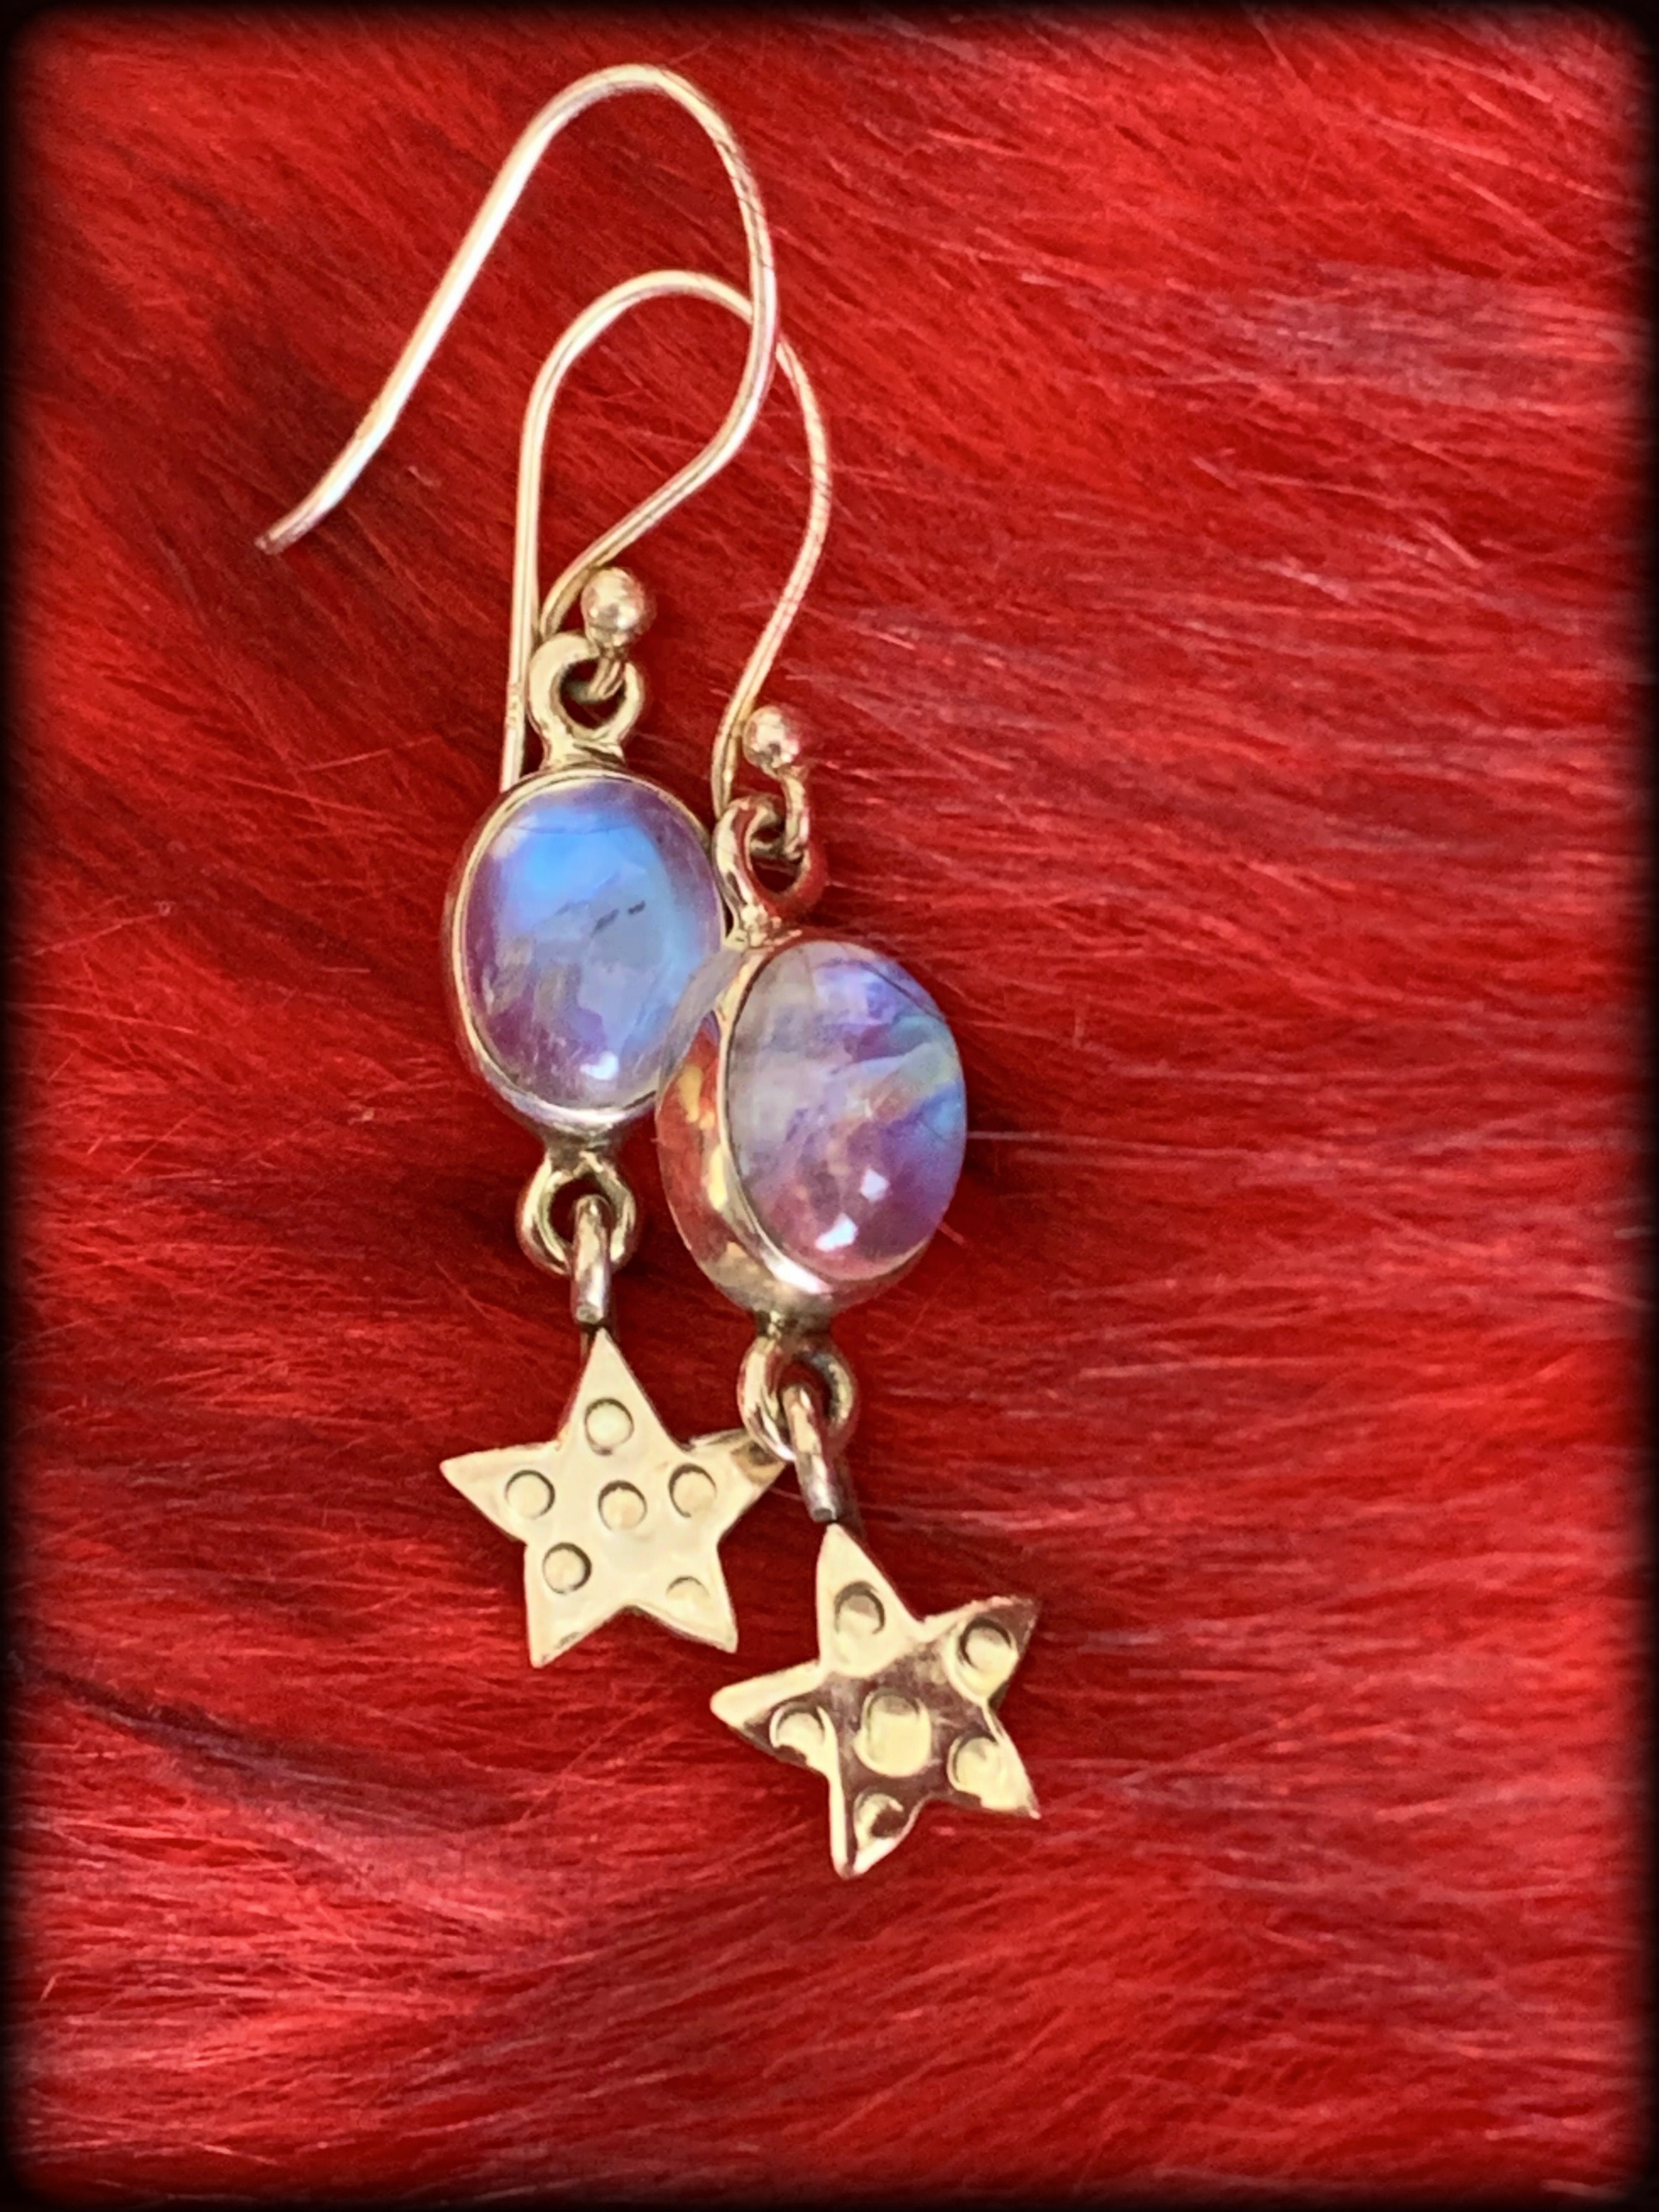 RAINBOW MOONSTONE & STERLING STAR EARRINGS ~ For Goddess Energy, Elemental Connection, and Spiritual Healing